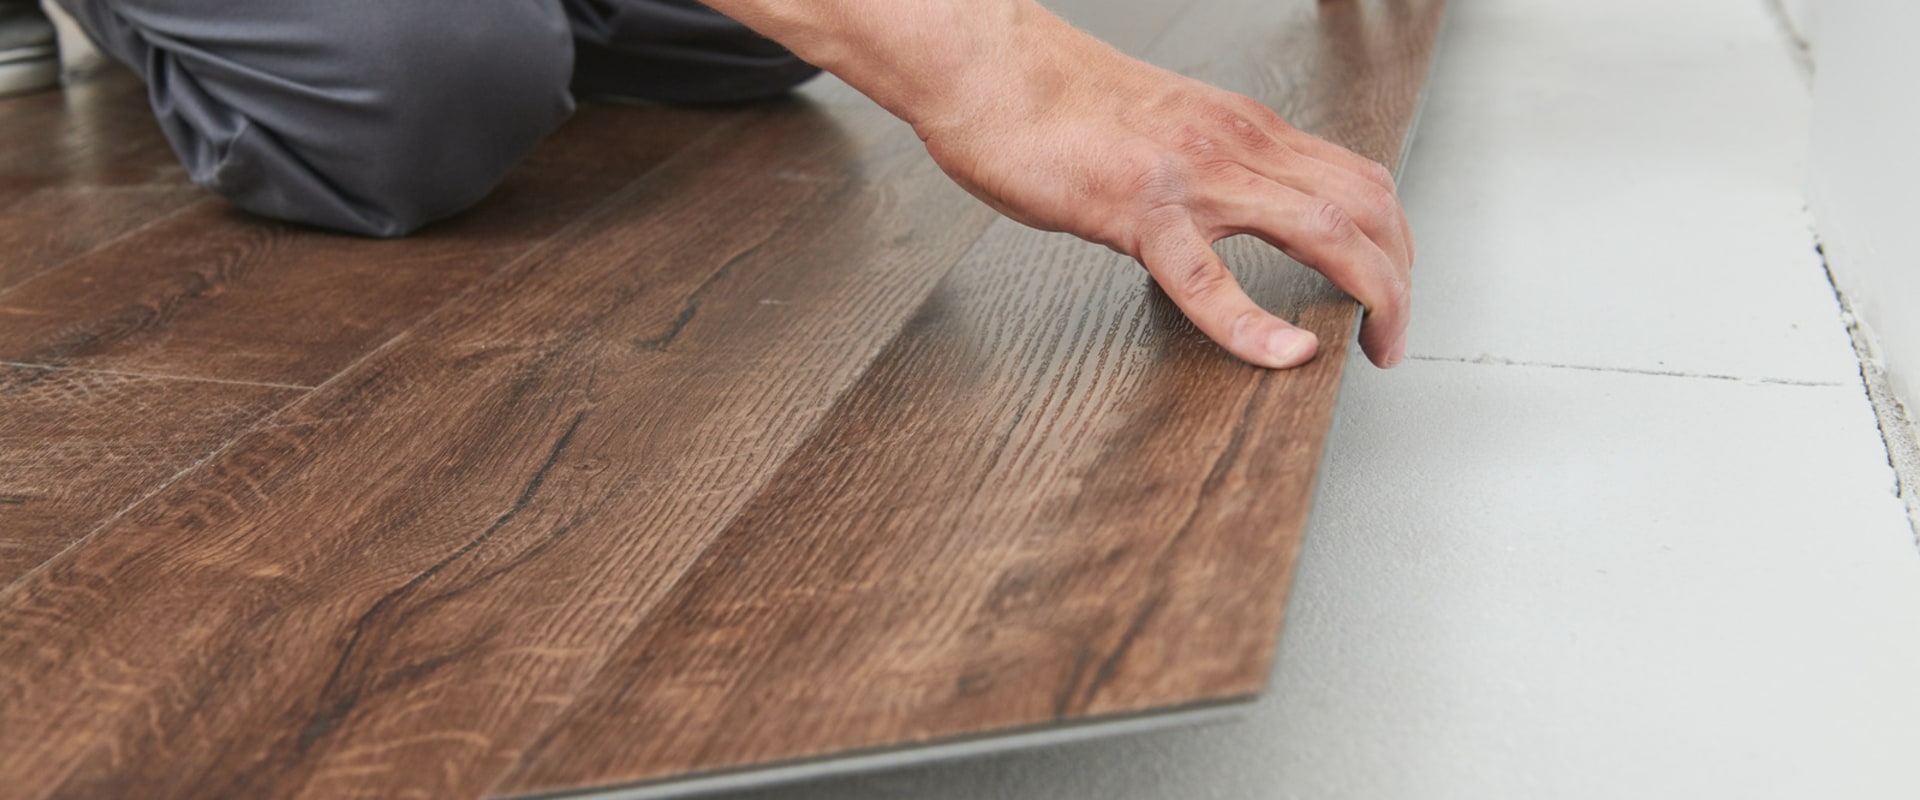 Can Hardwood Flooring Be Installed Over Laminate?